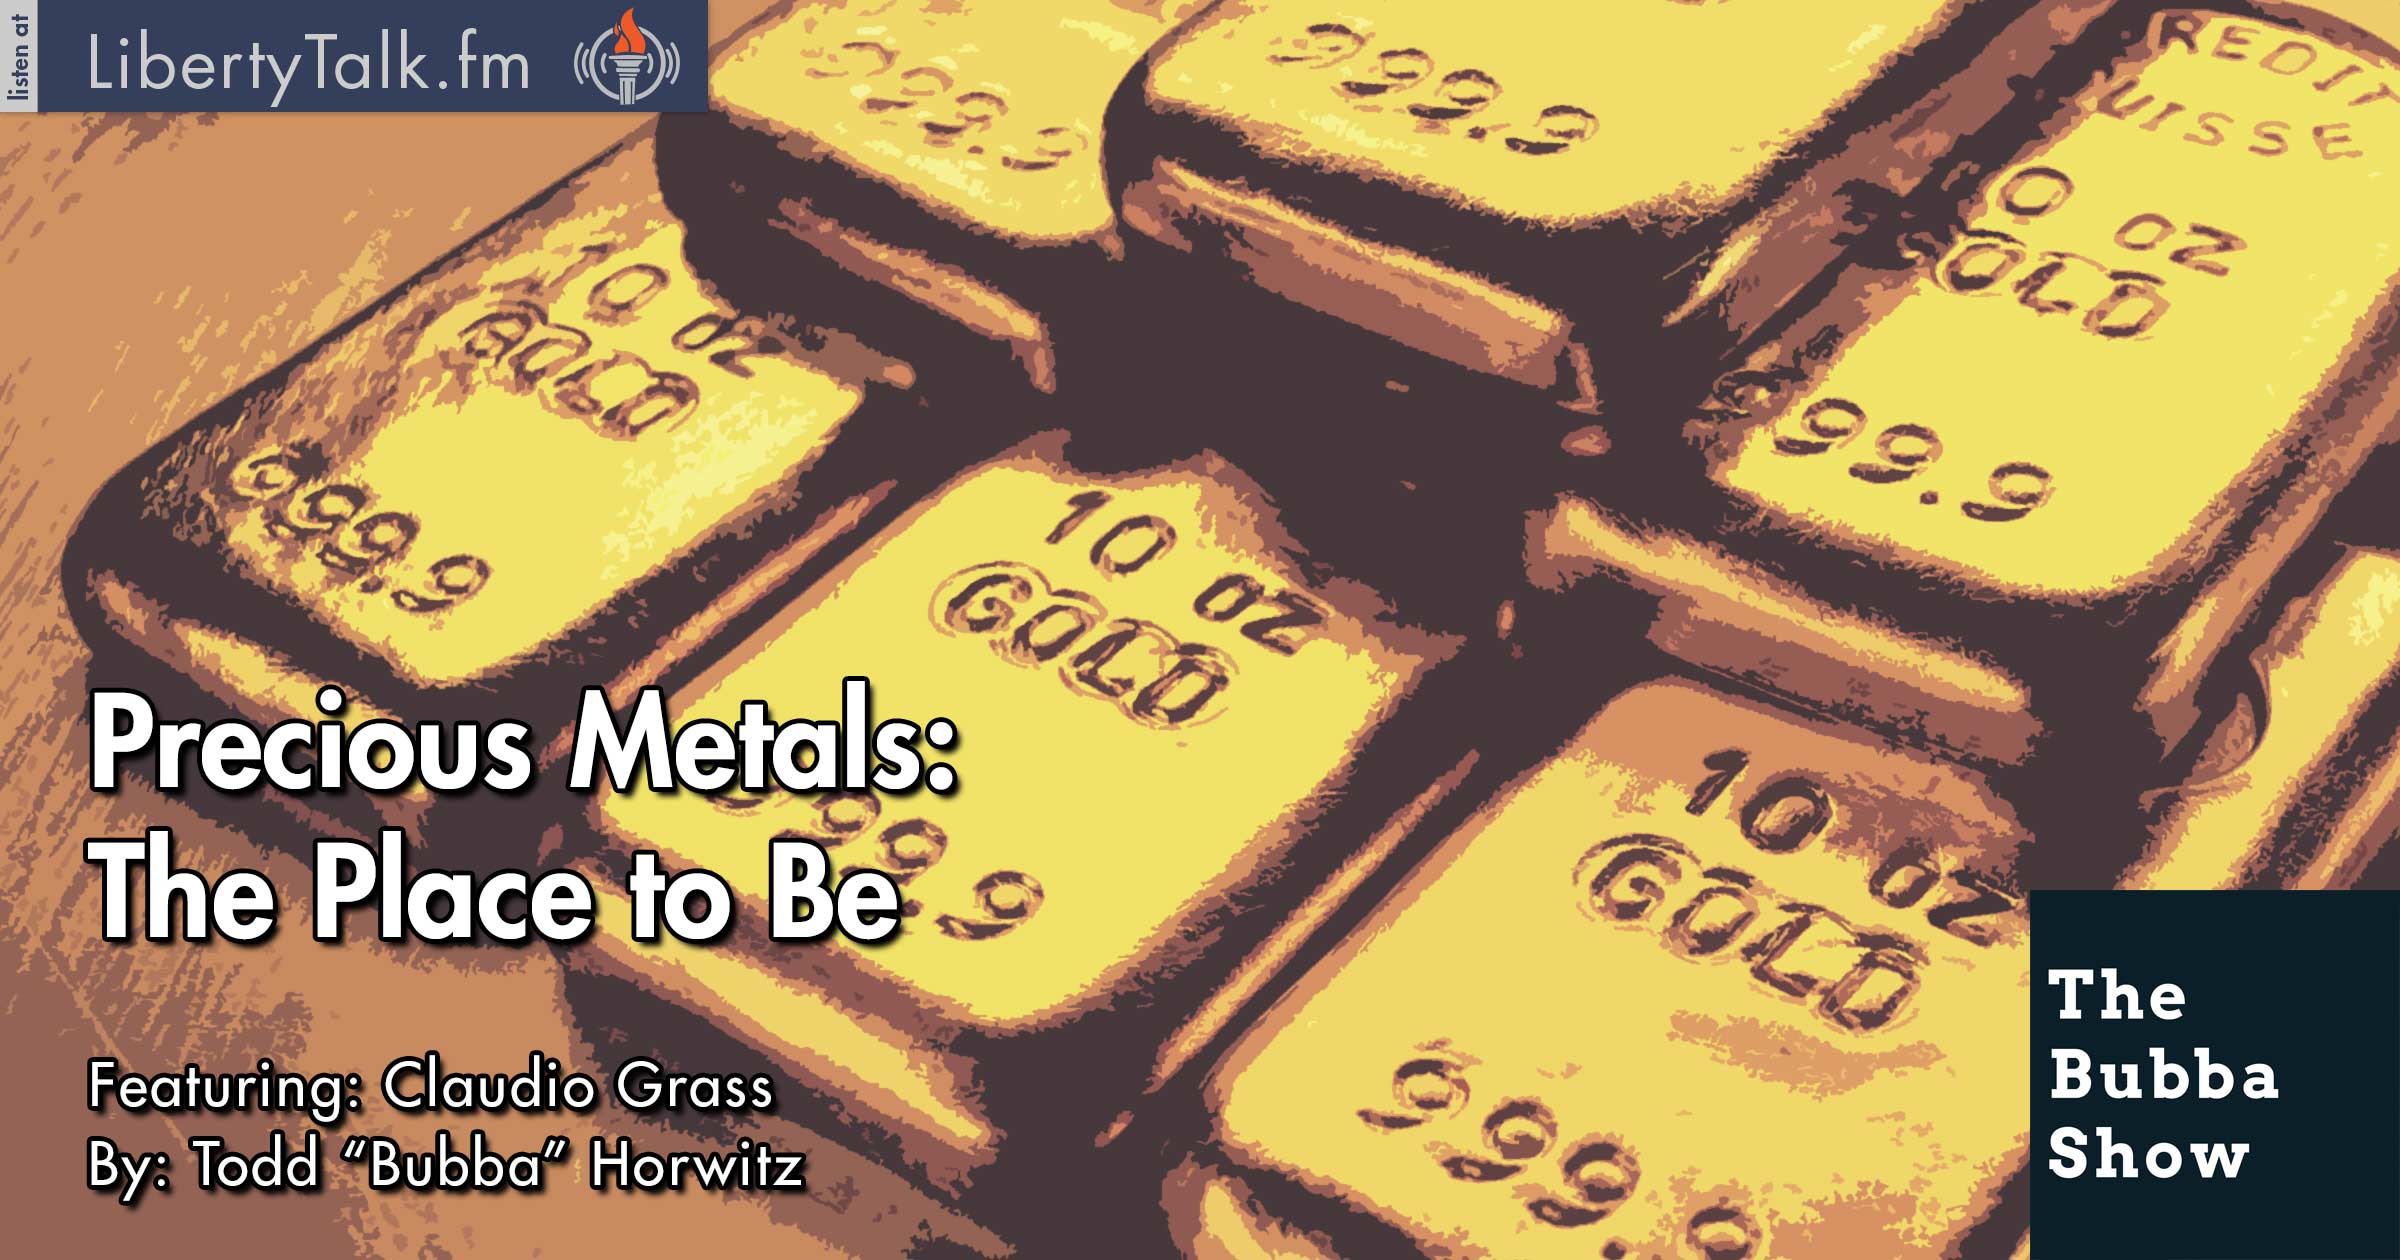 Precious Metals: The Place to Be - The Bubba Show